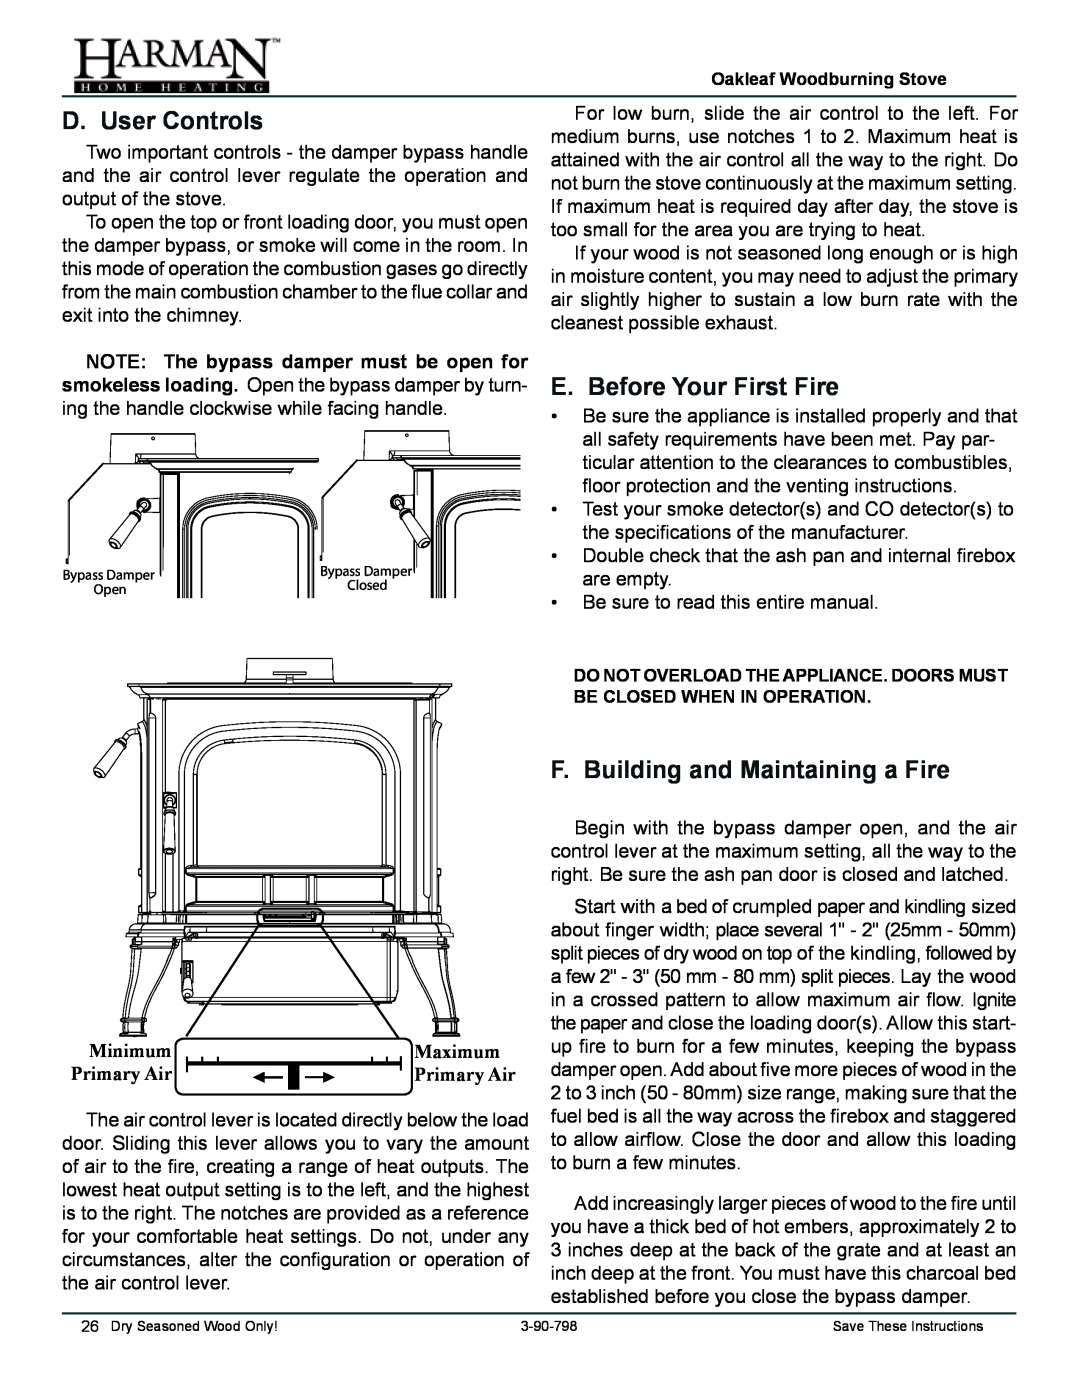 Harman Stove Company 1-90-797000 D. User Controls, E. Before Your First Fire, F. Building and Maintaining a Fire, Minimum 